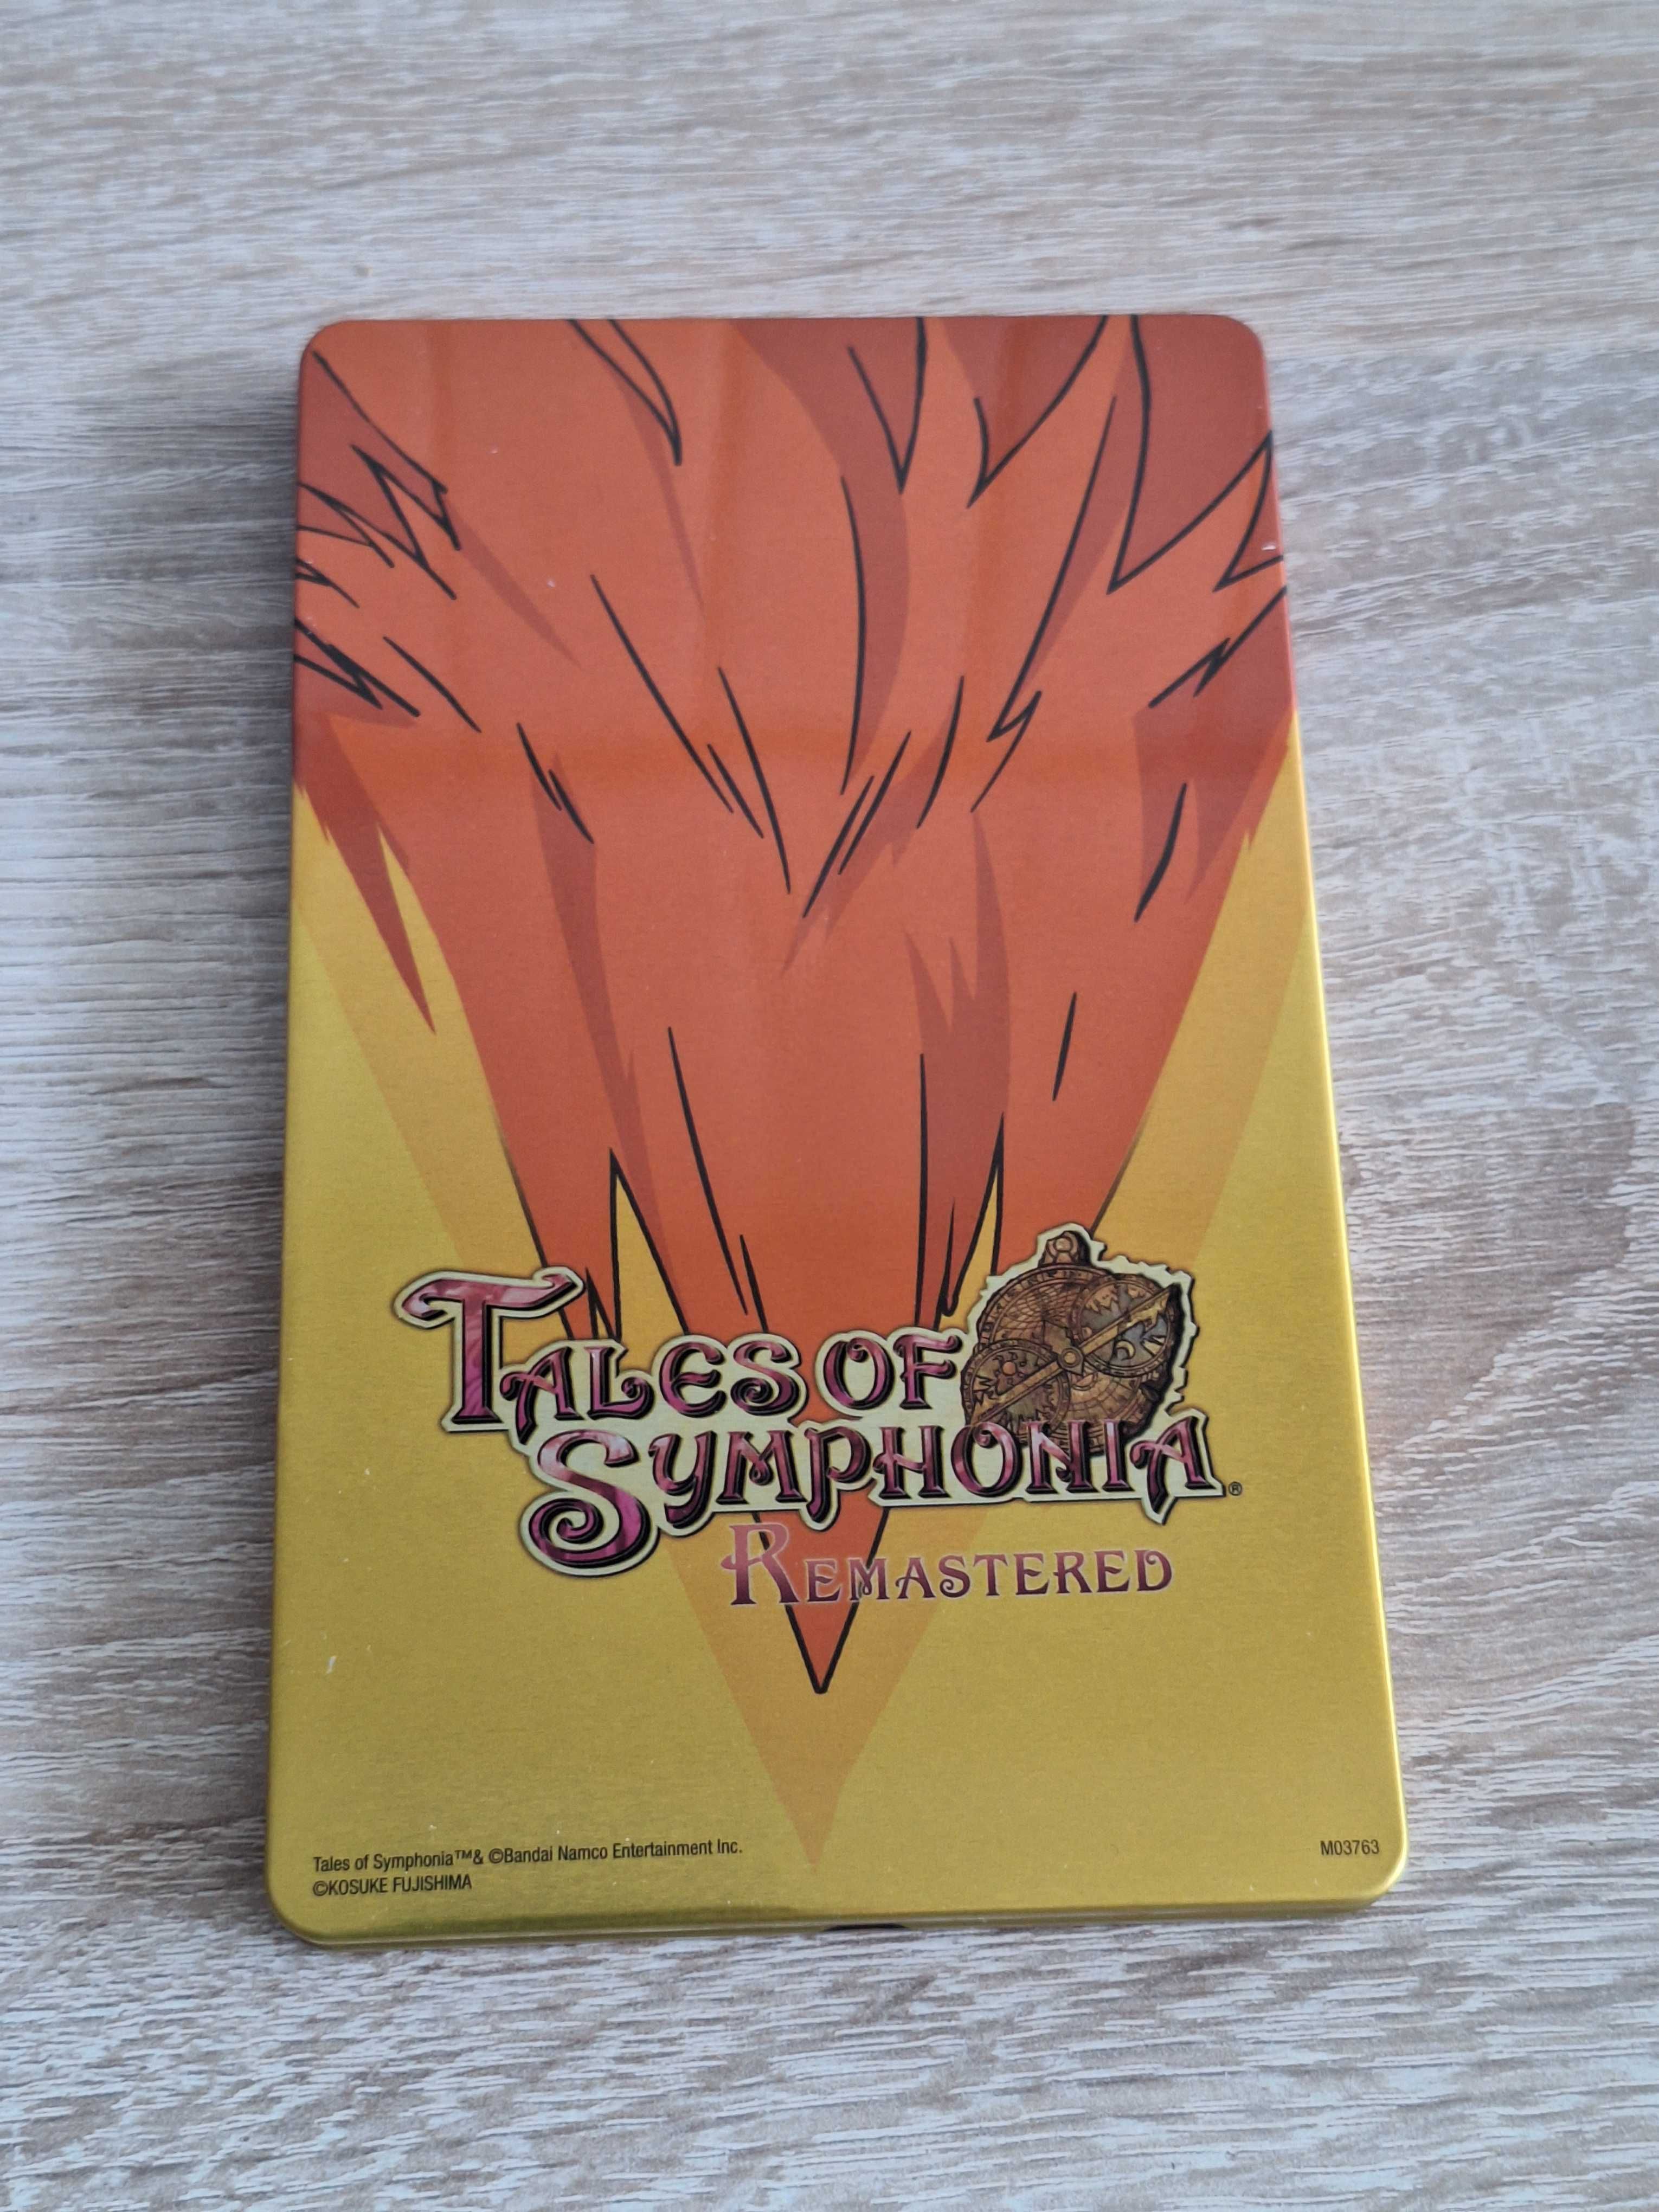 Tales of Symphonia Remastered Chosen Edition Nintendo Switch